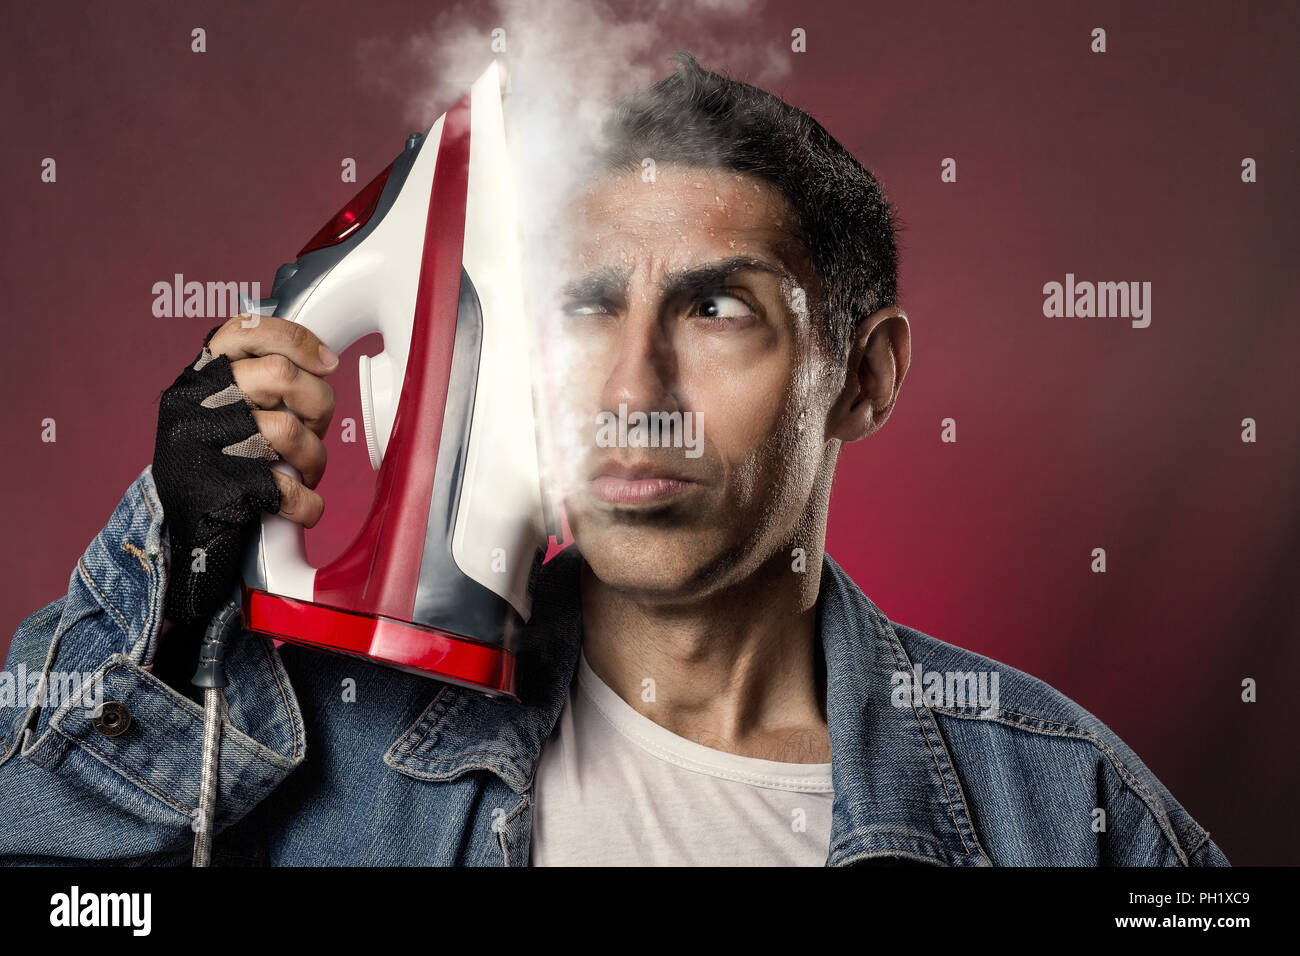 Crazy man ironing his own face with the iron on and emitting steam. Stock Photo